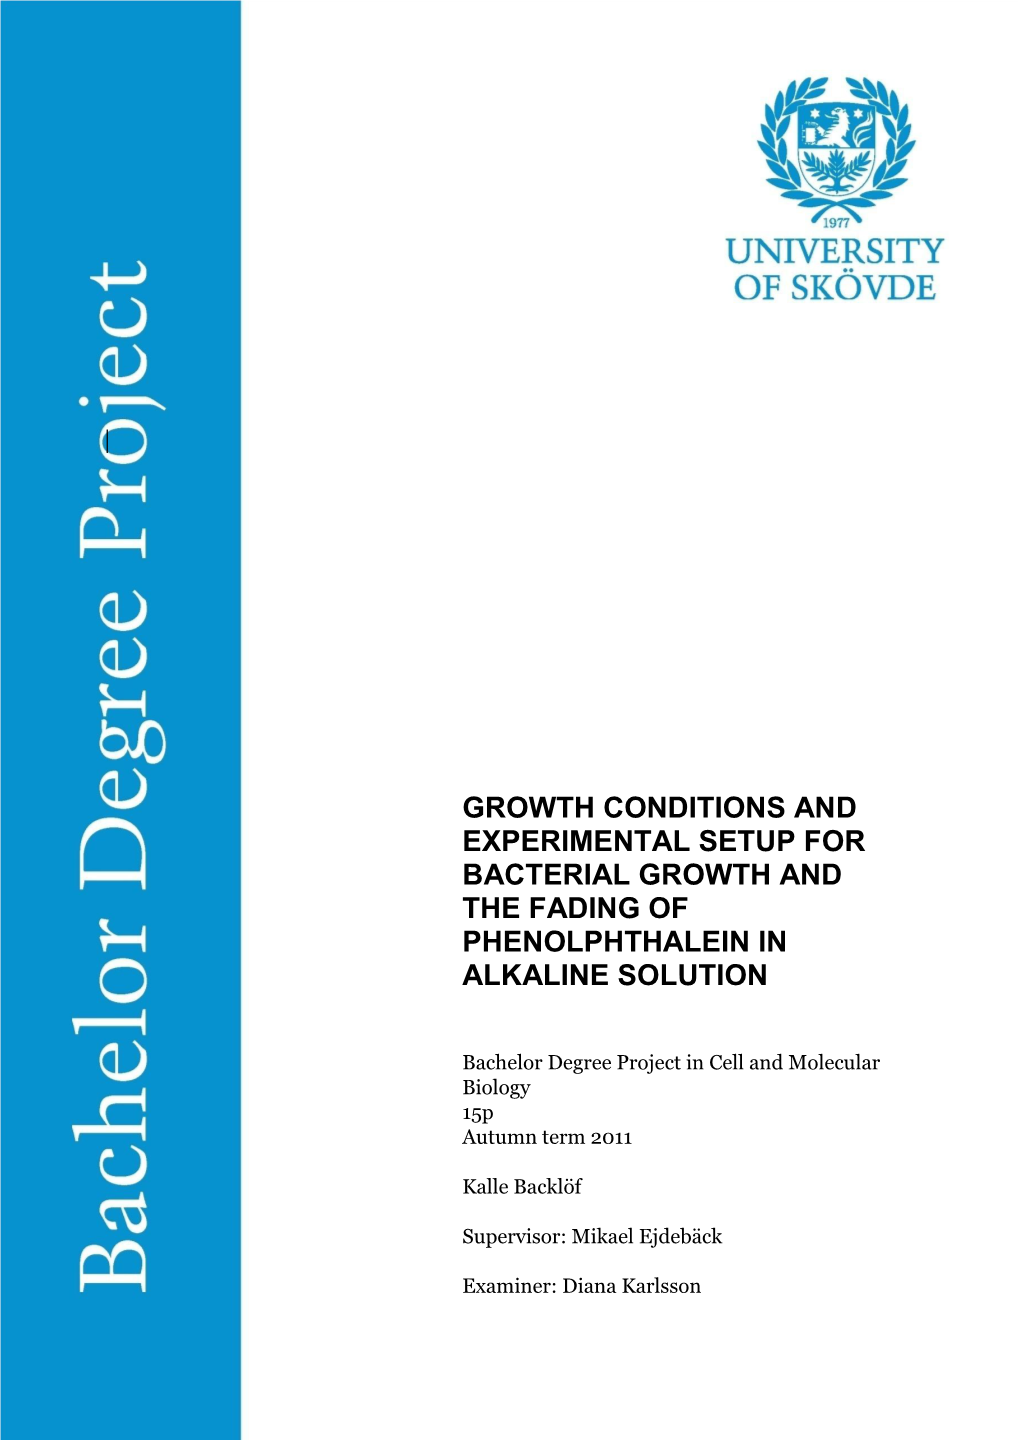 Growth Conditions and Experimental Setup for Bacterial Growth and the Fading of Phenolphthalein in Alkaline Solution